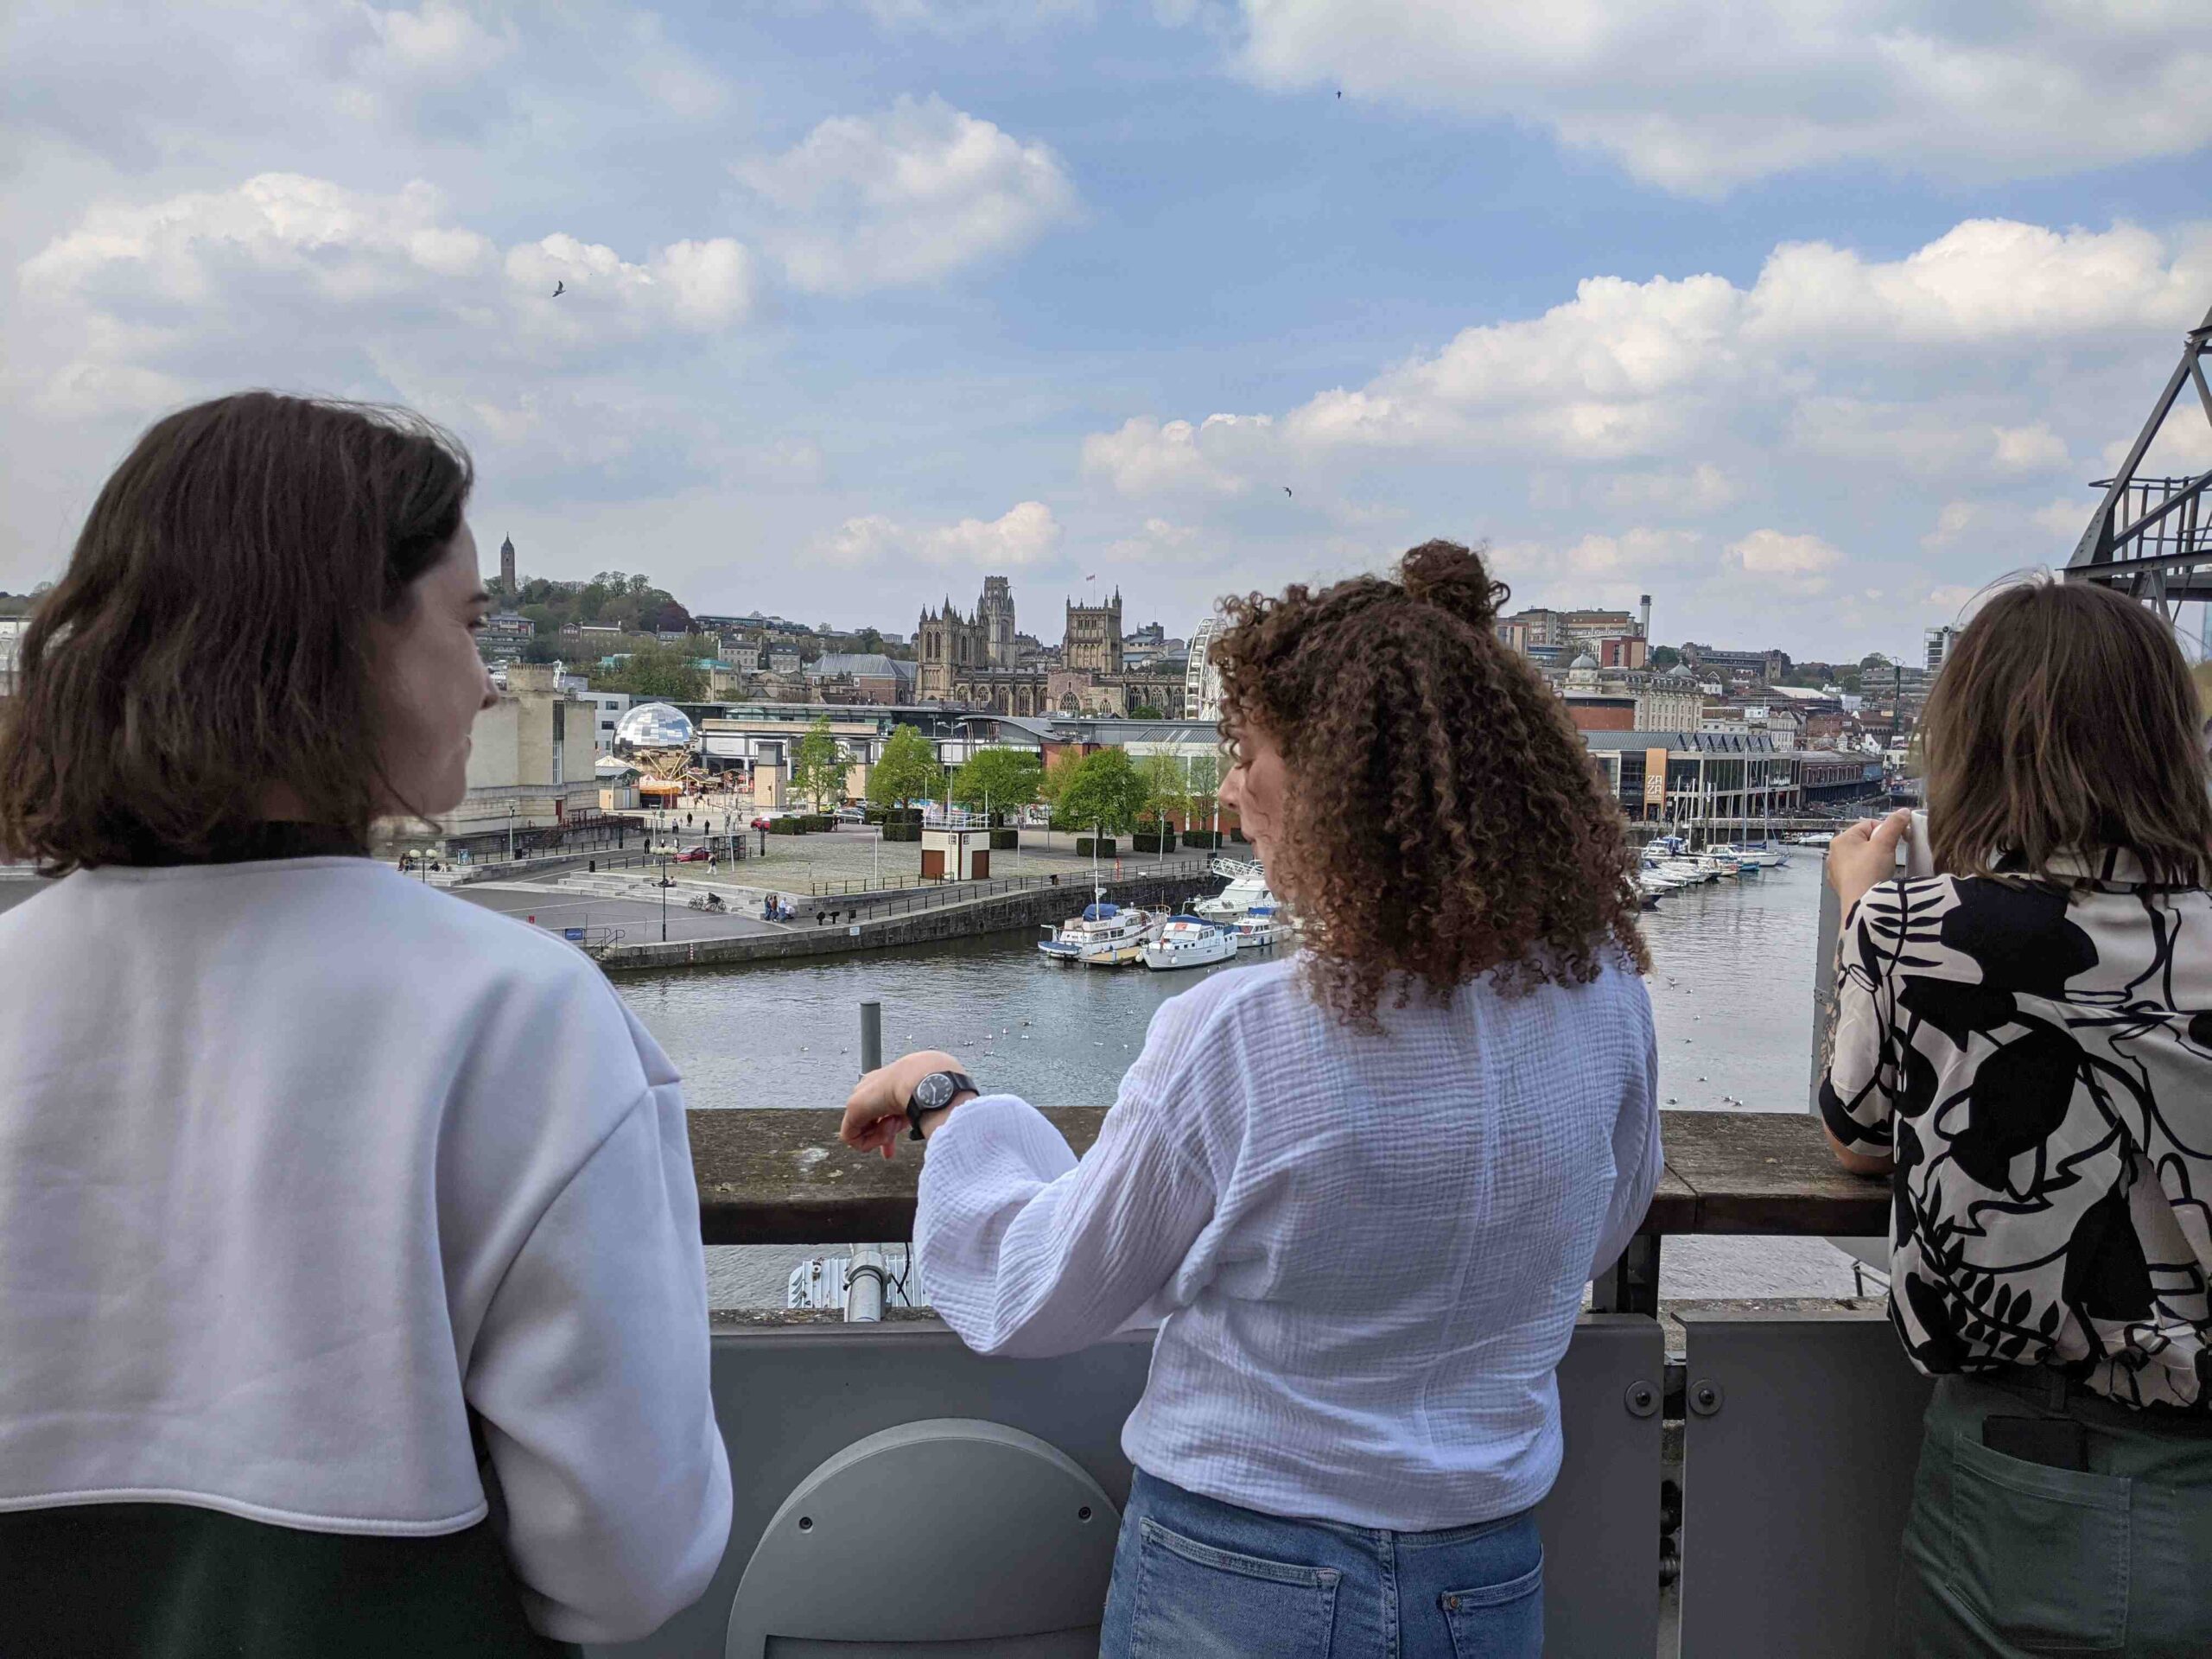 Decorative image: three (3) people standing on a balcony together, looking over a river and city skyline